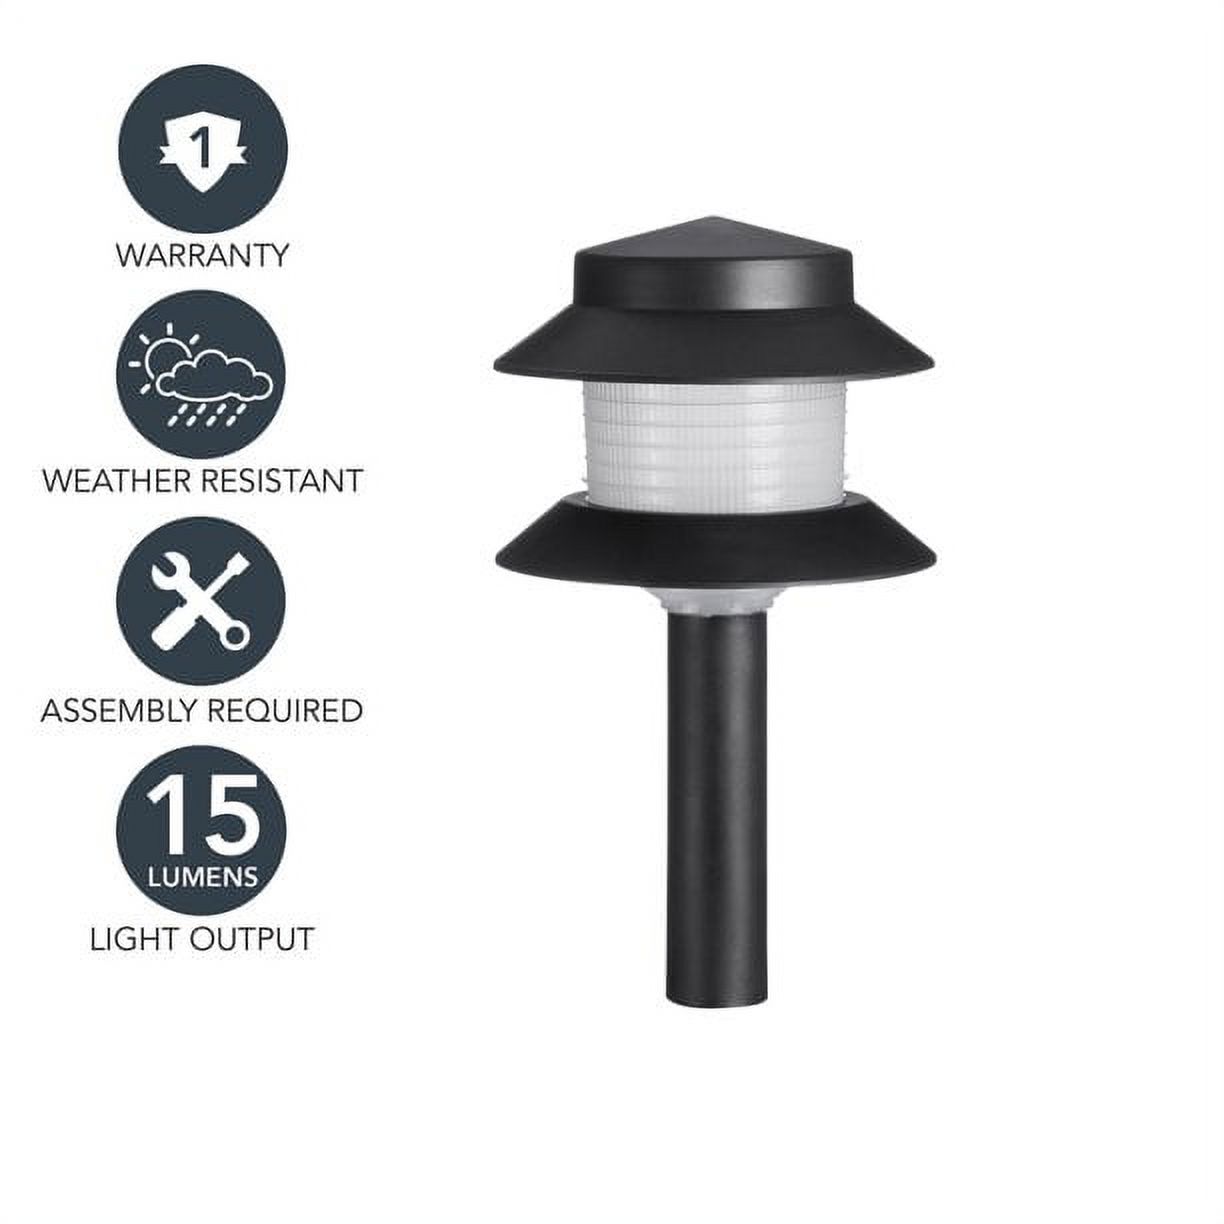 Sterno Home Two-tiered Outdoor Landscaping Path Light, Black (Power Pack  and Landscape Wire Sold Separately)